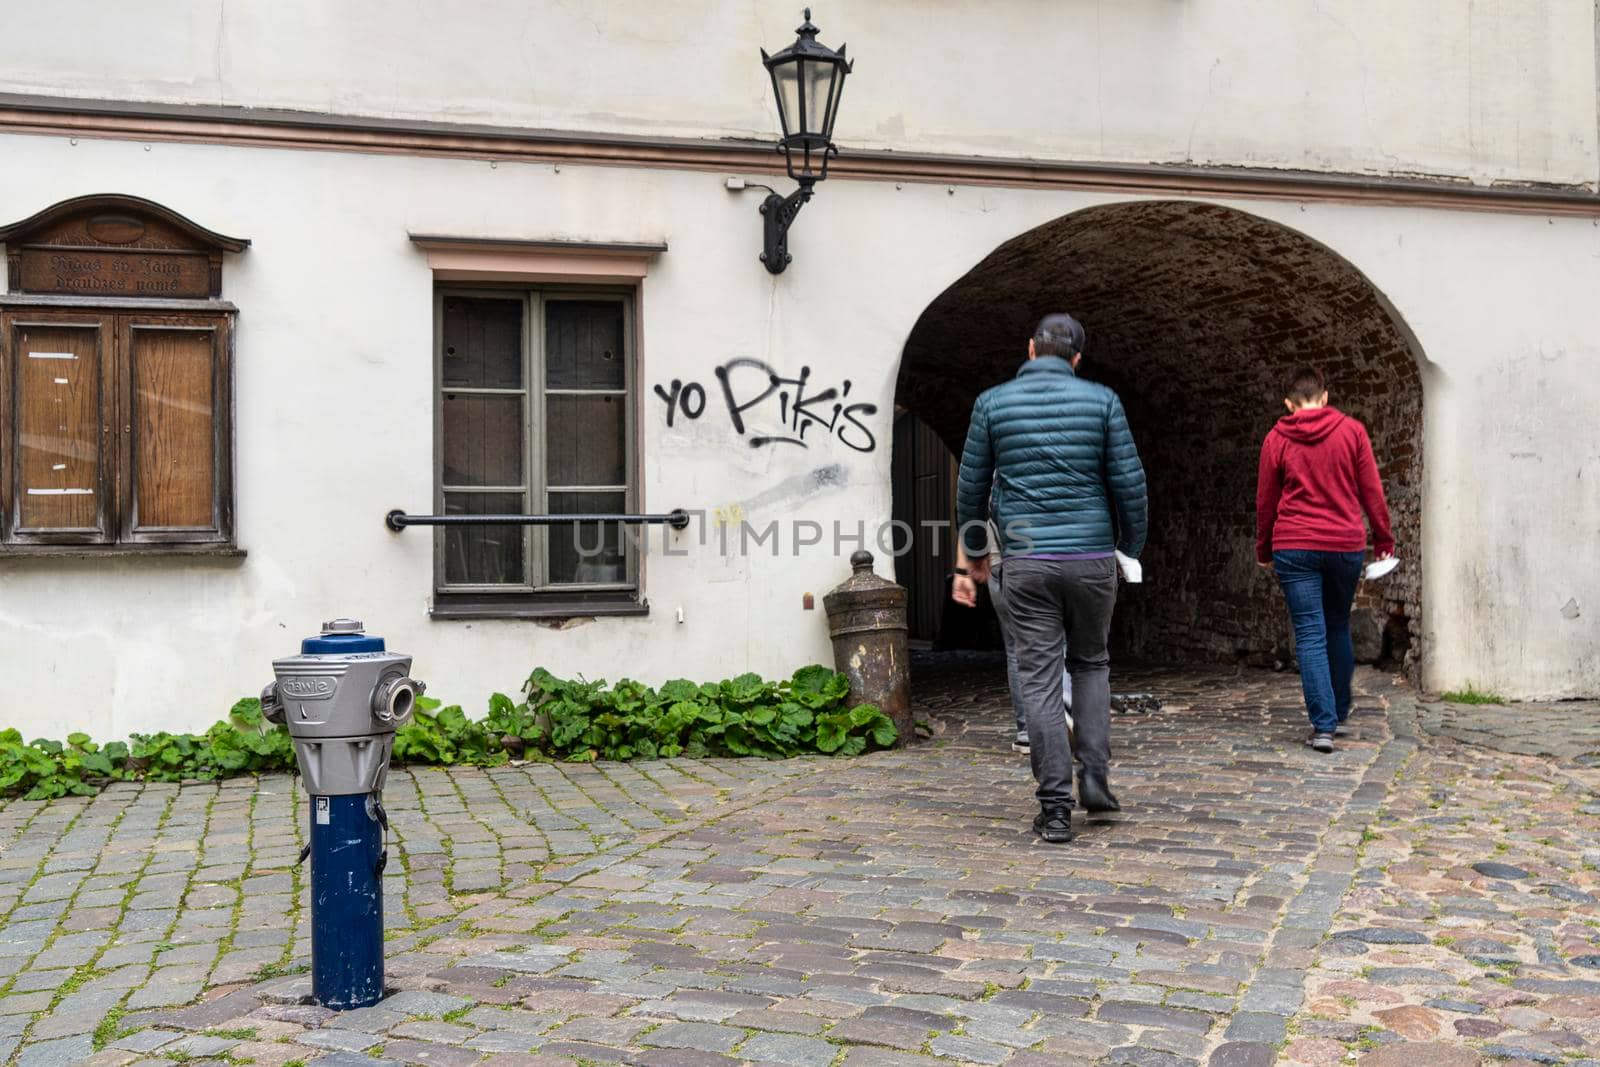 Passages on the streets in Riga, Latvia by sergiodv